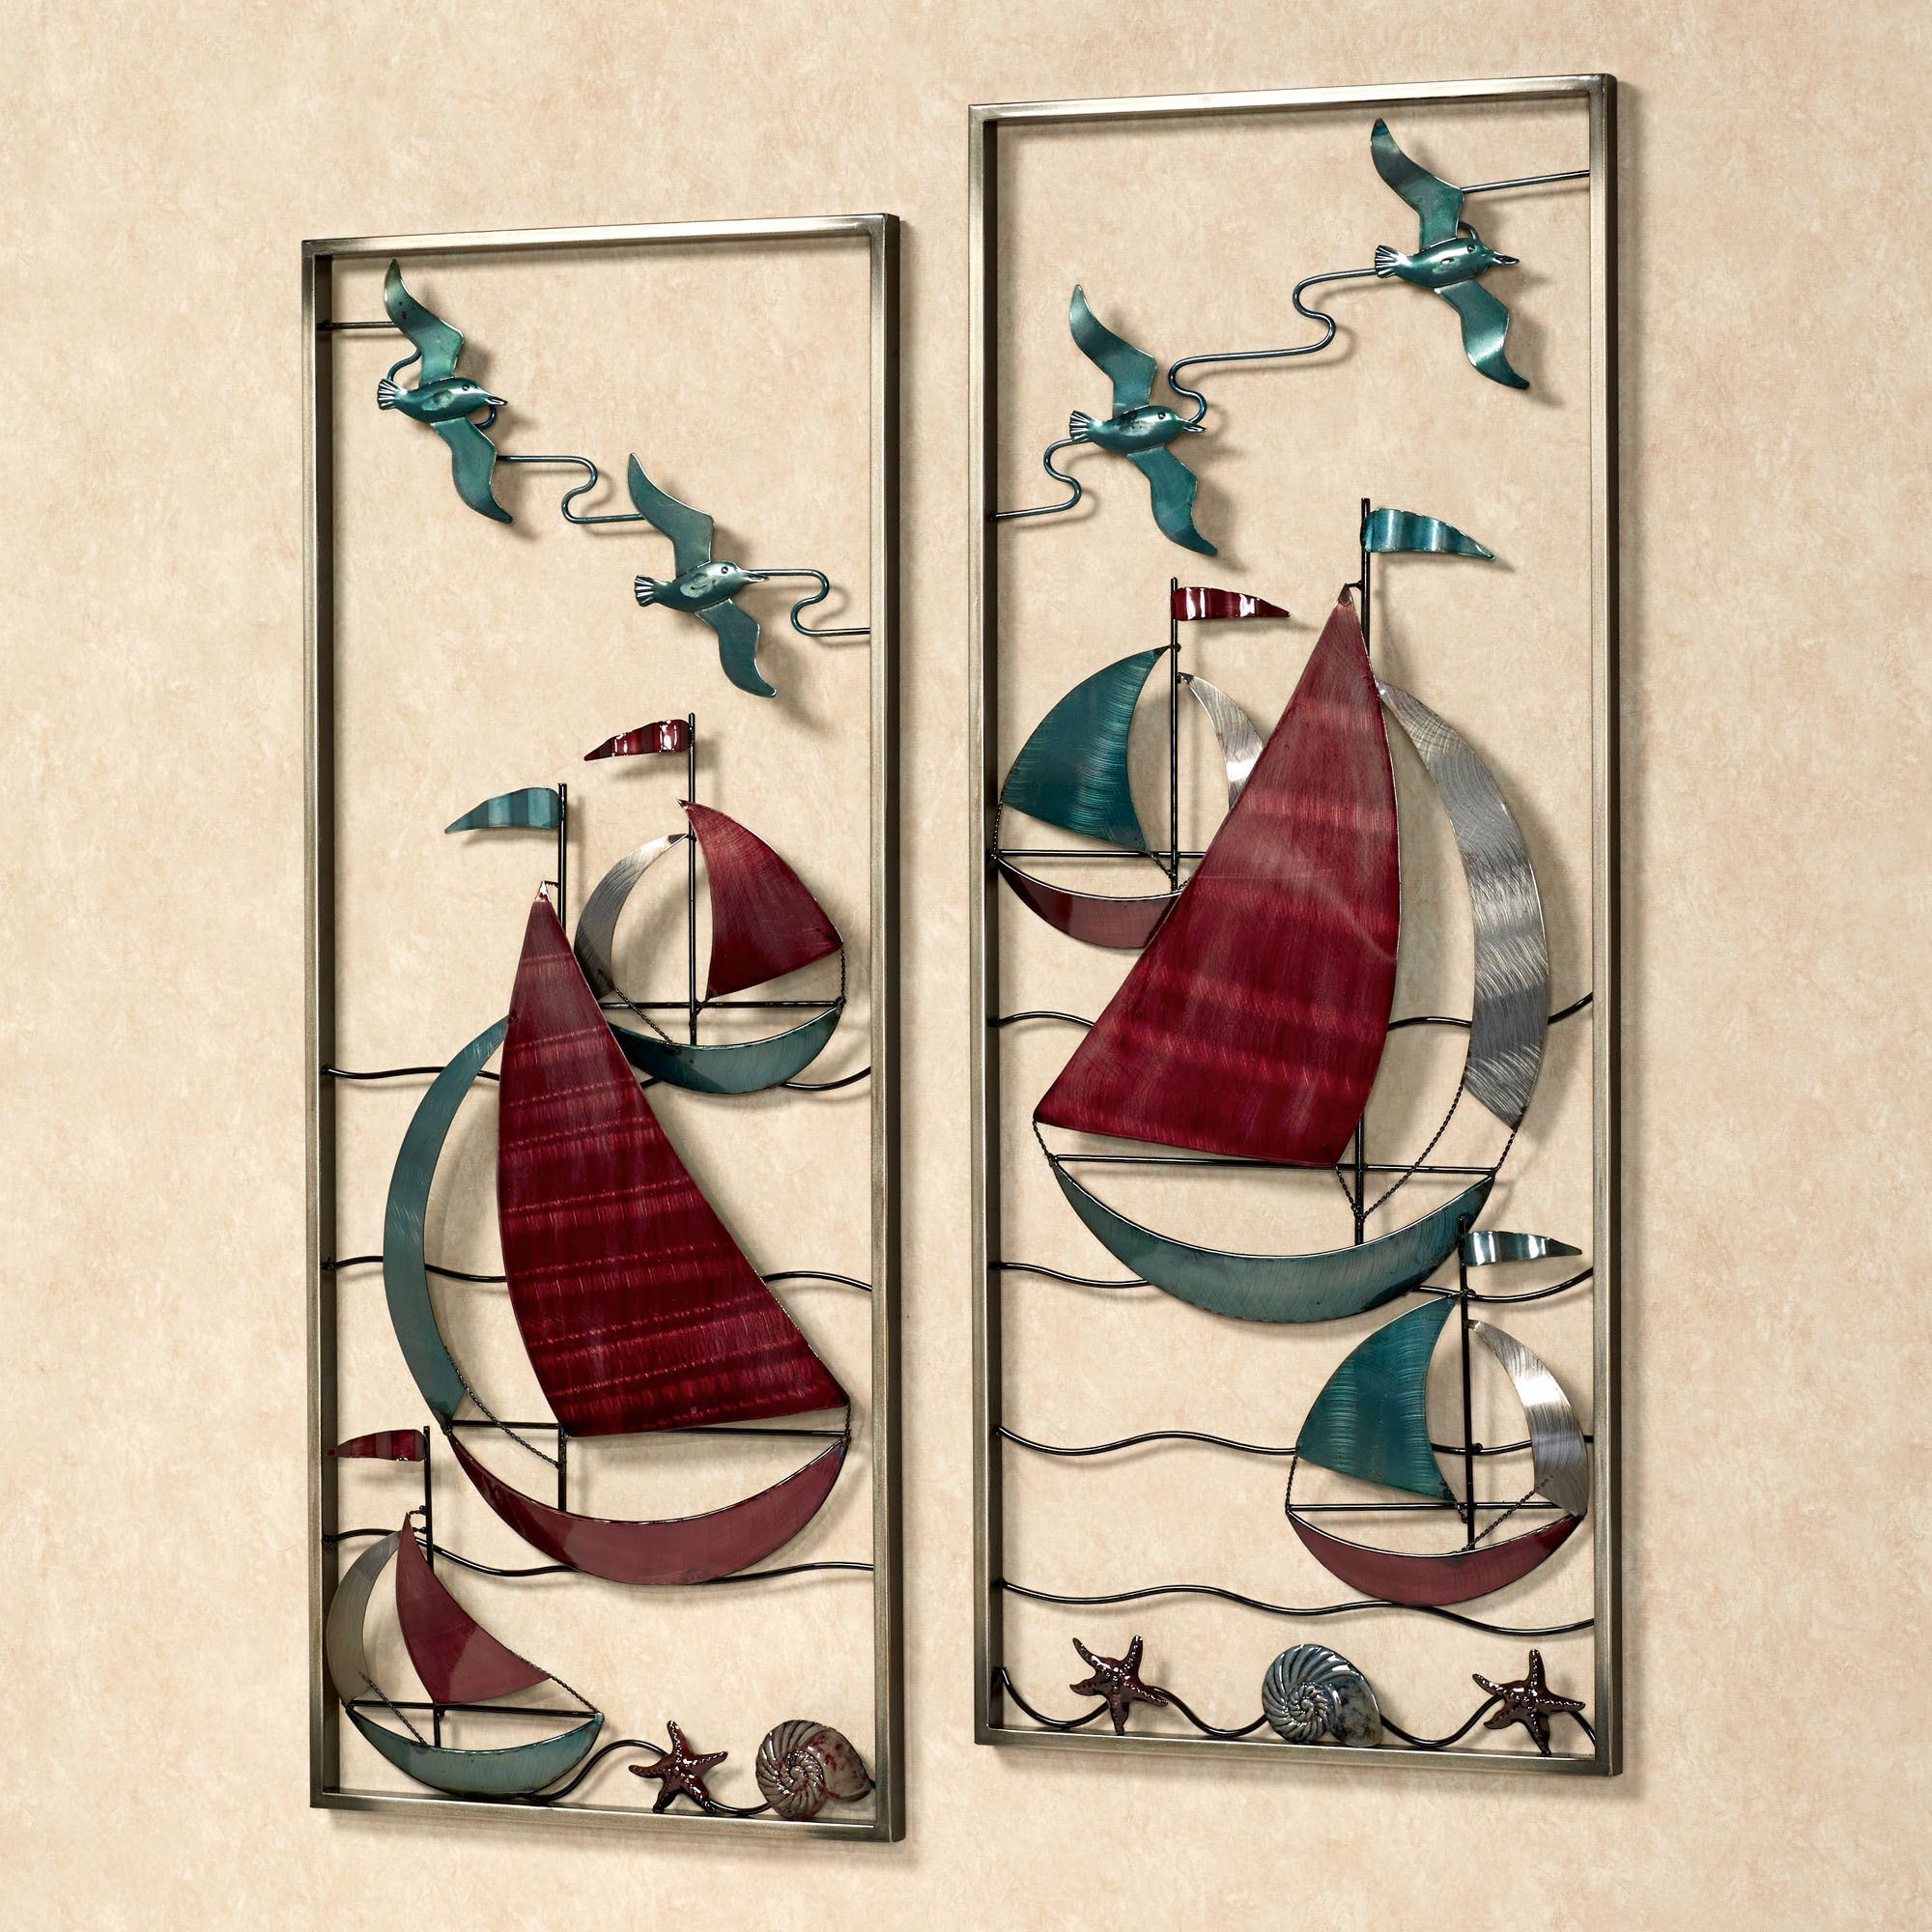 Current Ocean Metal Wall Art Intended For With The Sea Metal Sailboat Wall Art Panel Set (View 10 of 15)